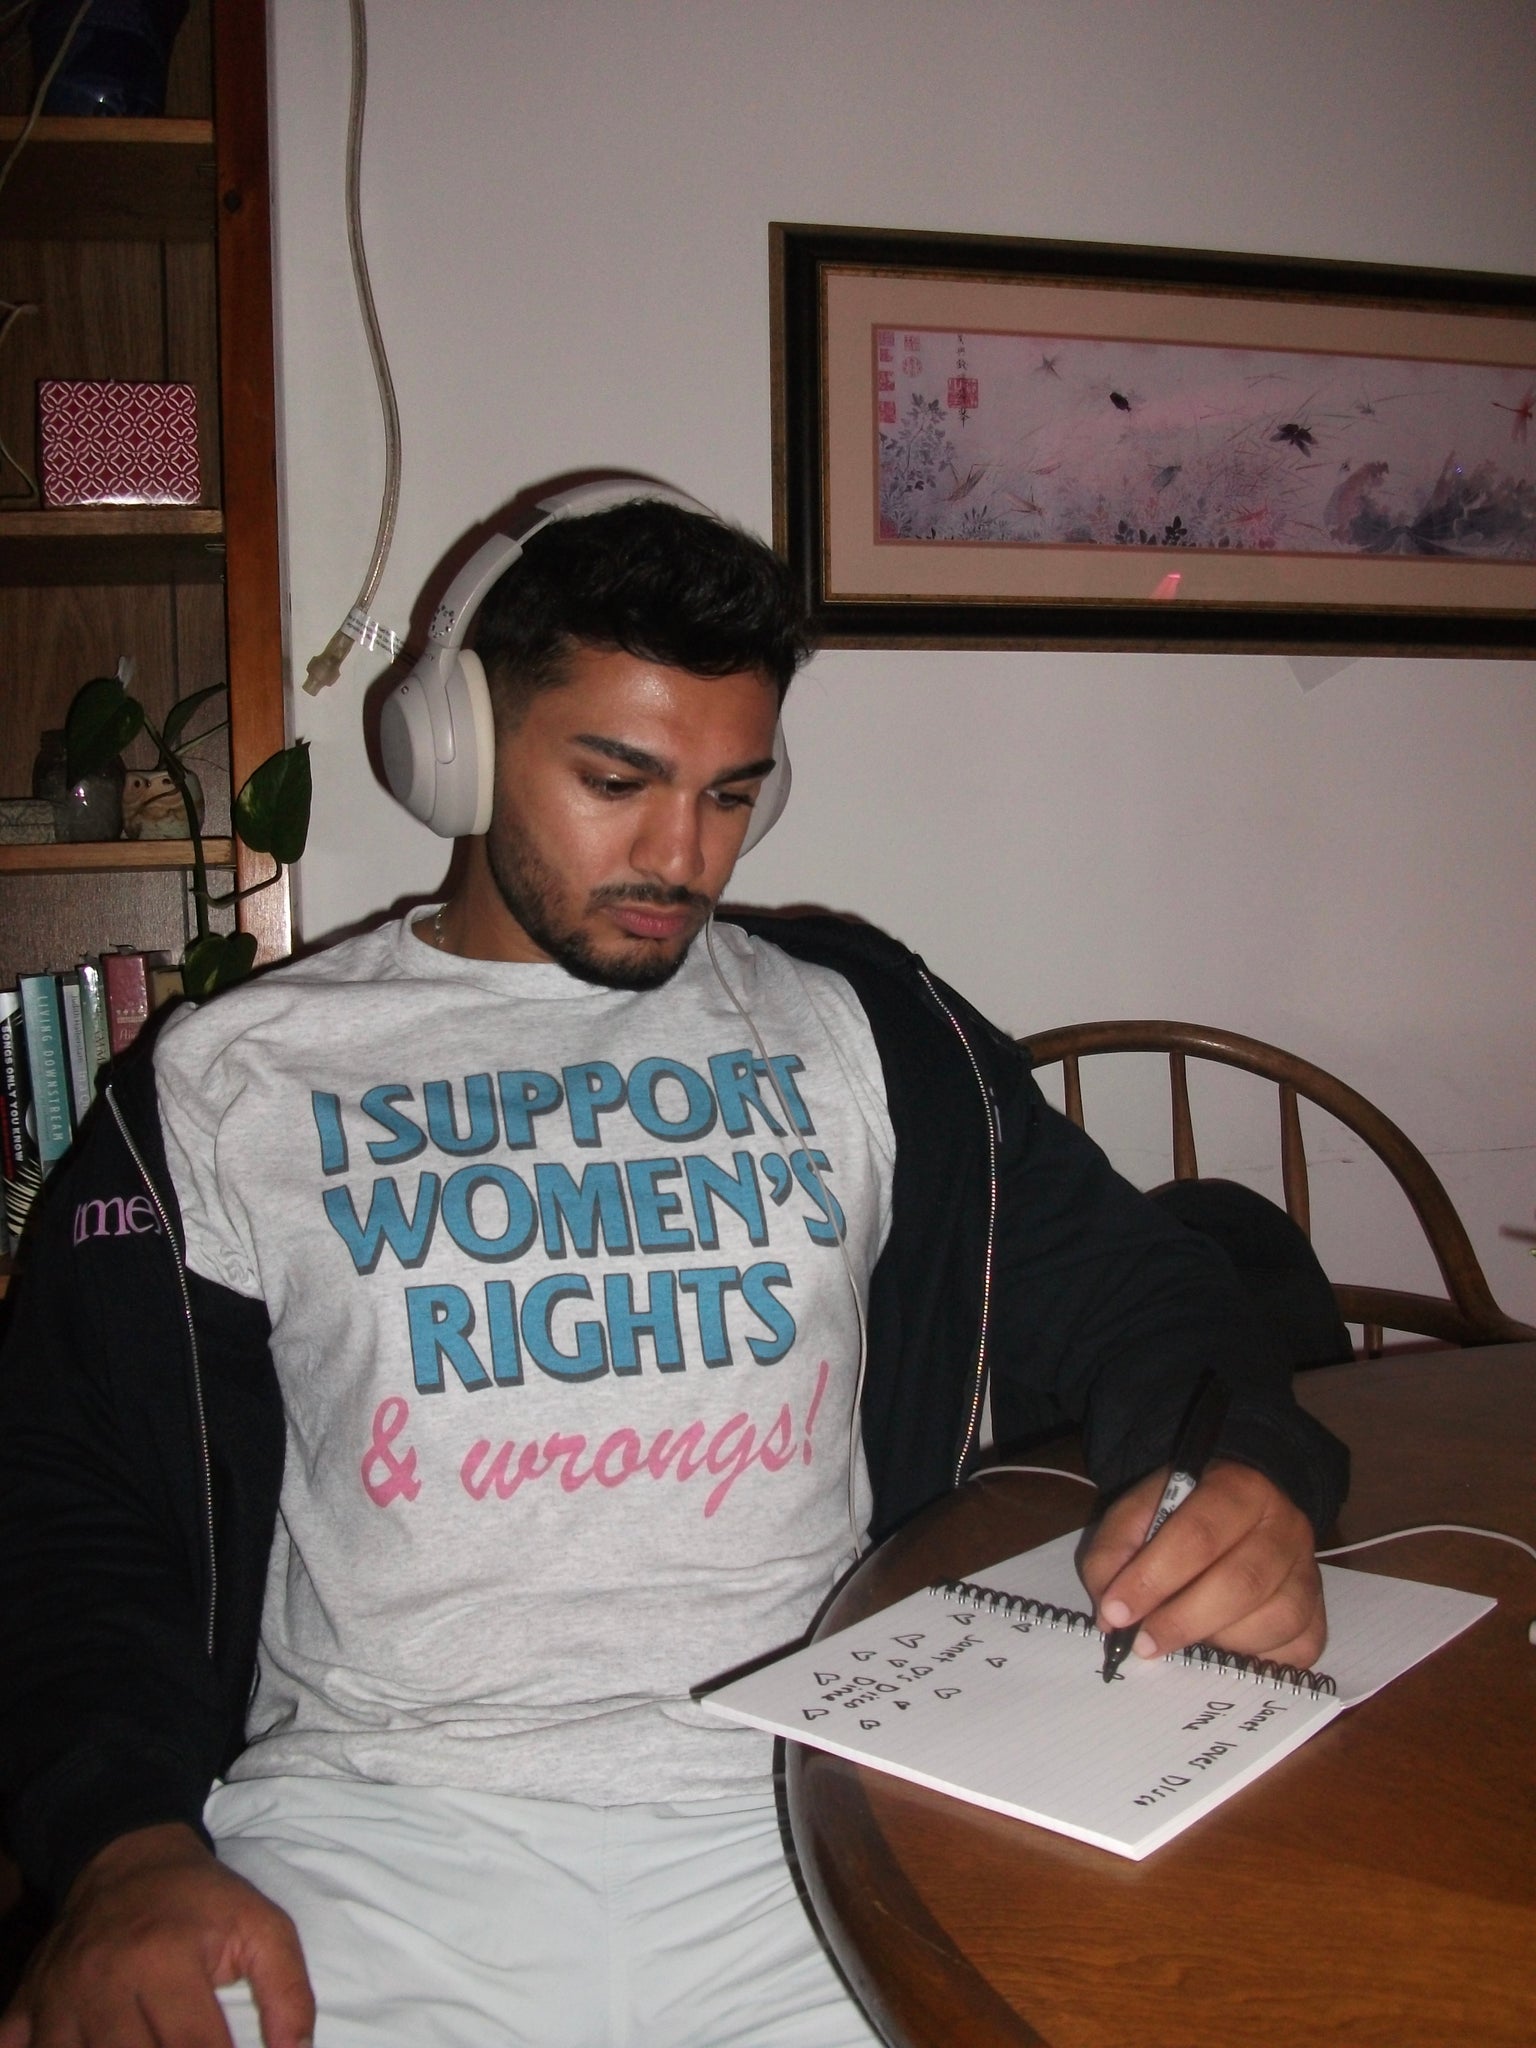 I Support Women's Rights & Wrongs Tee